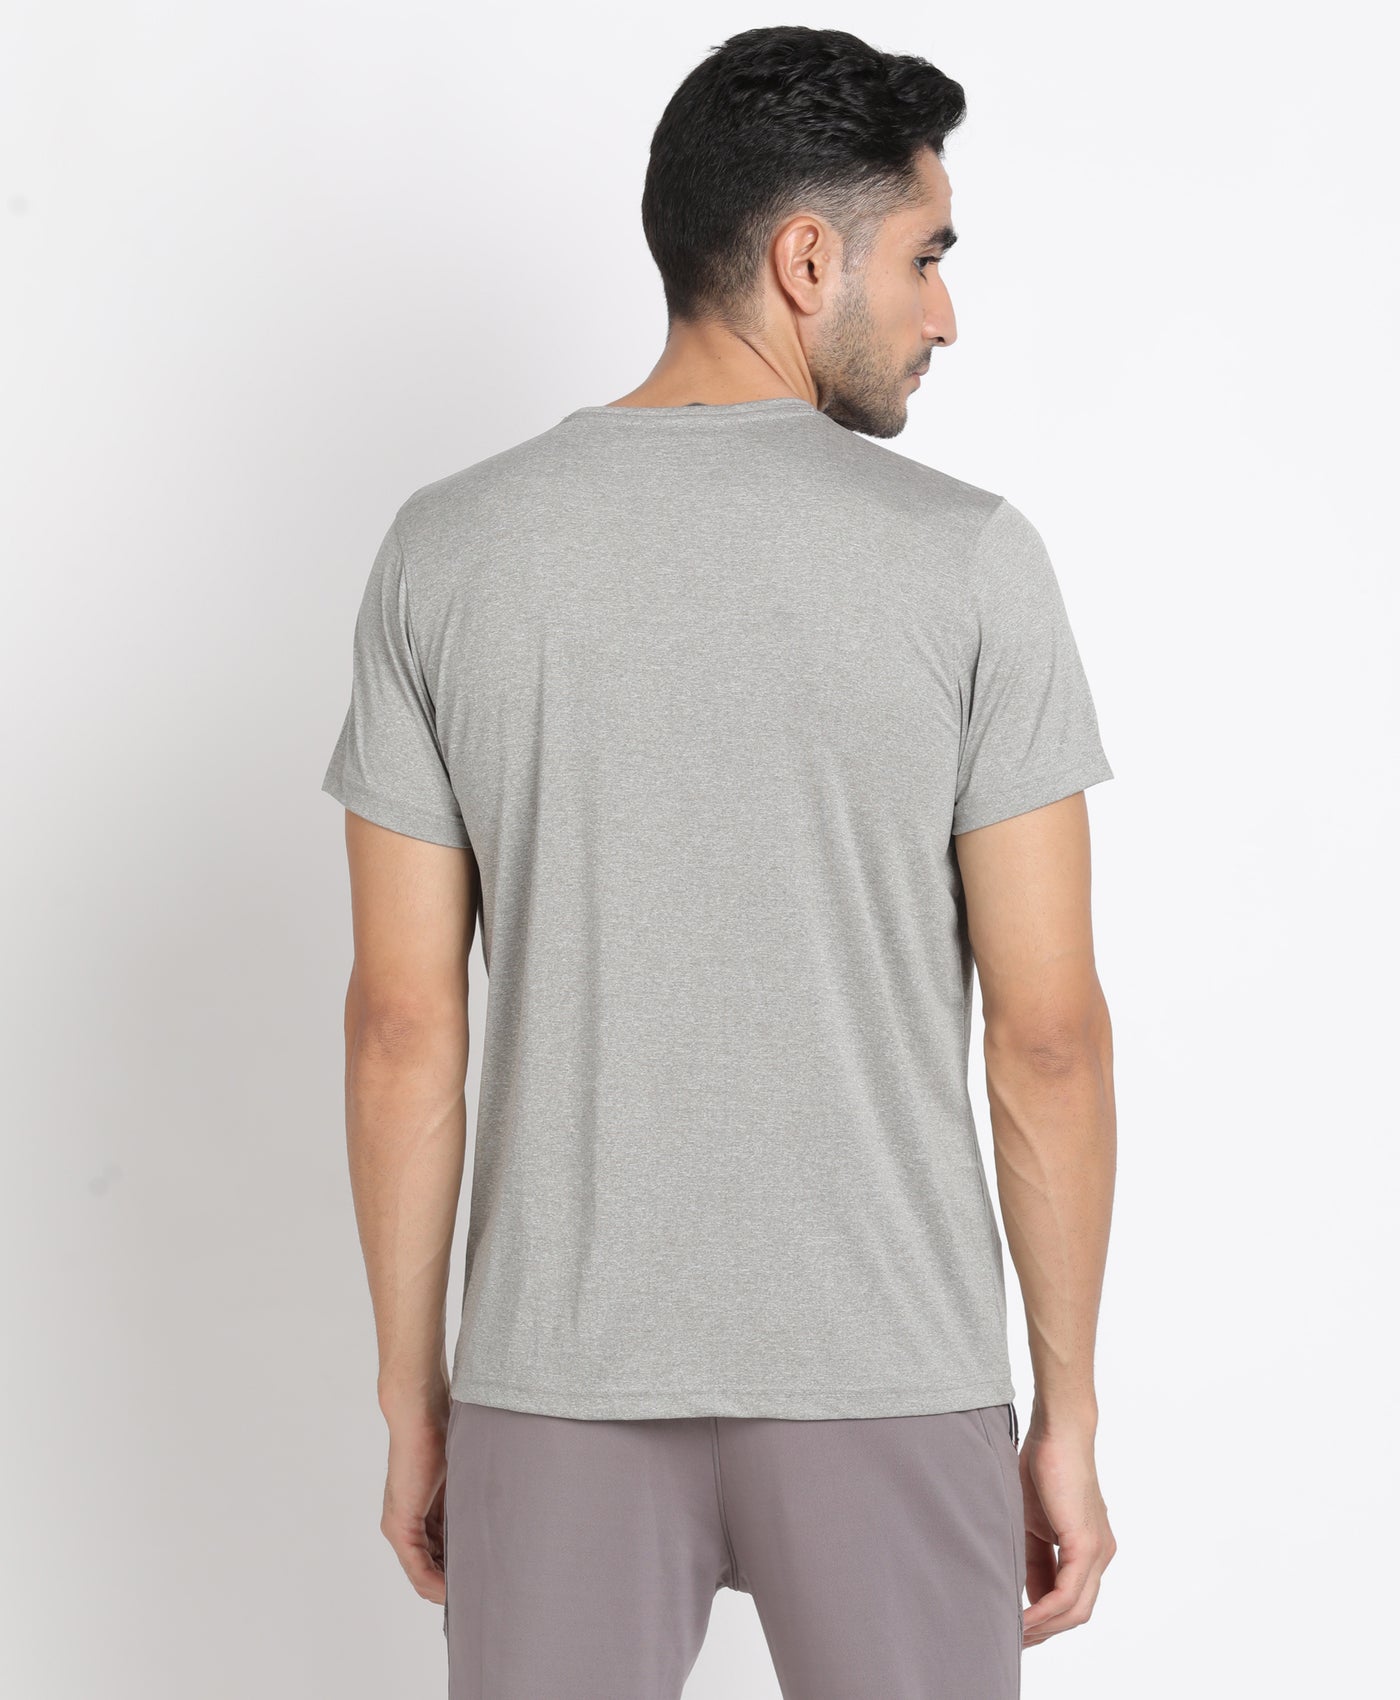 Polyester Grey Printed Crew Neck Half Sleeve Active Essential T-Shirt